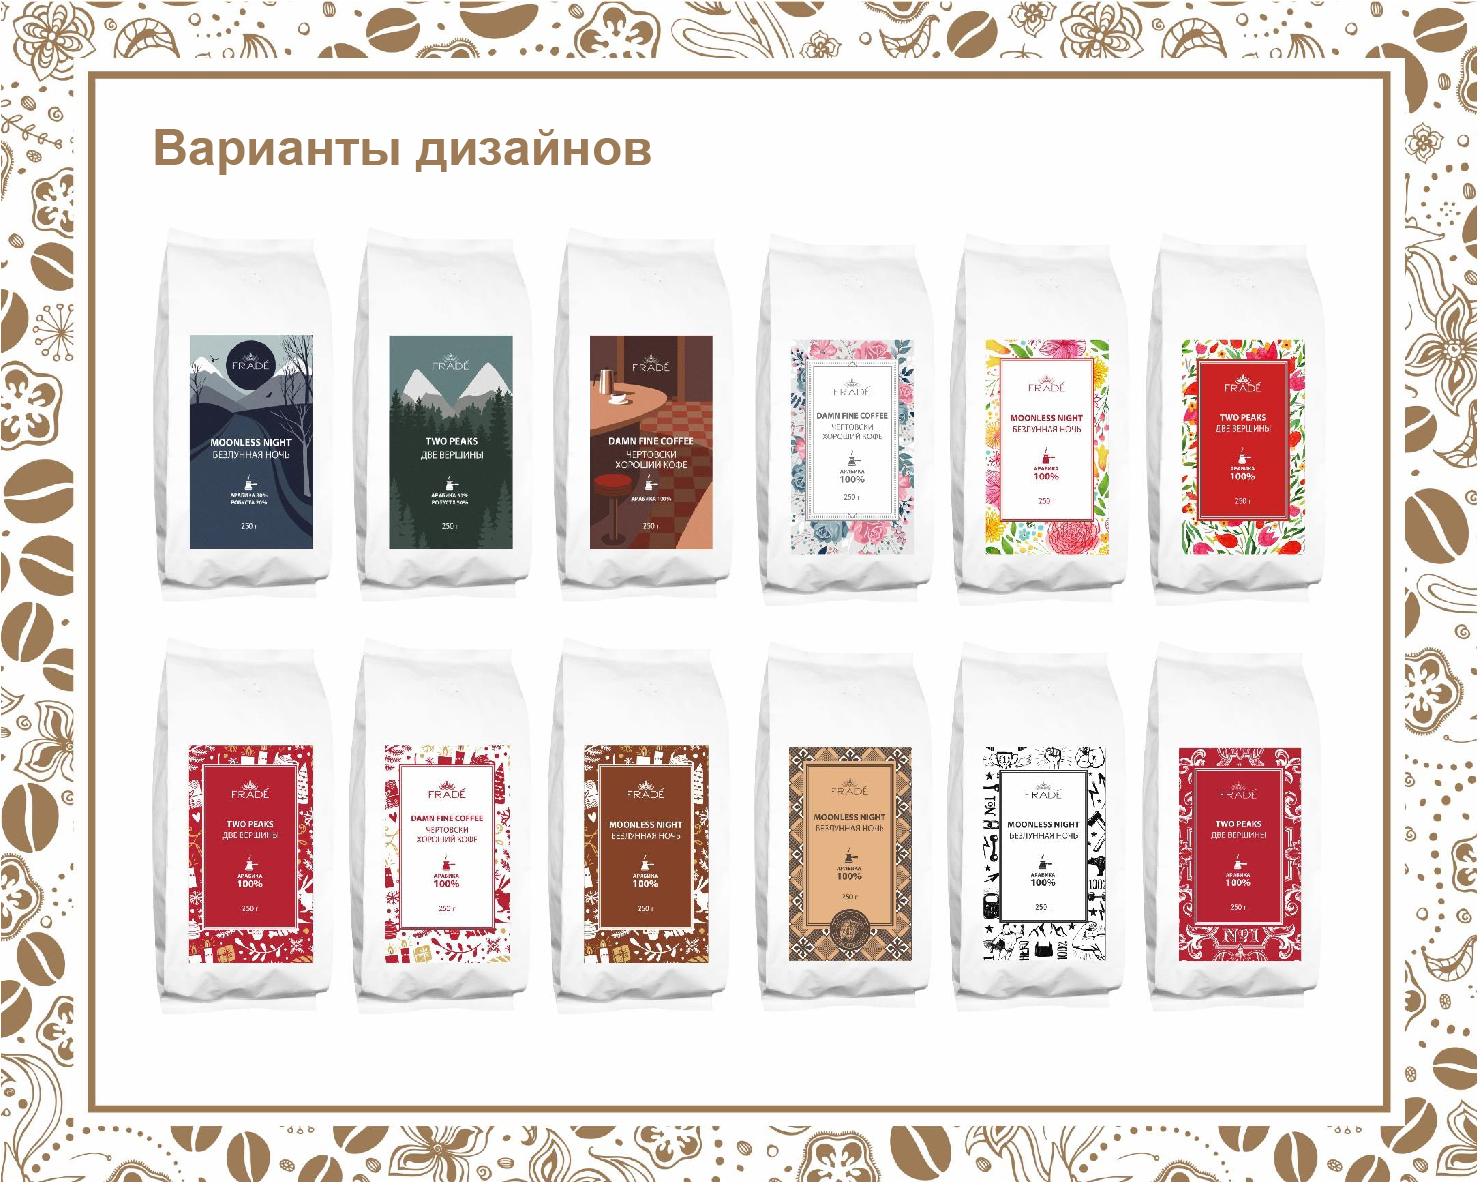 real coffee франшиза